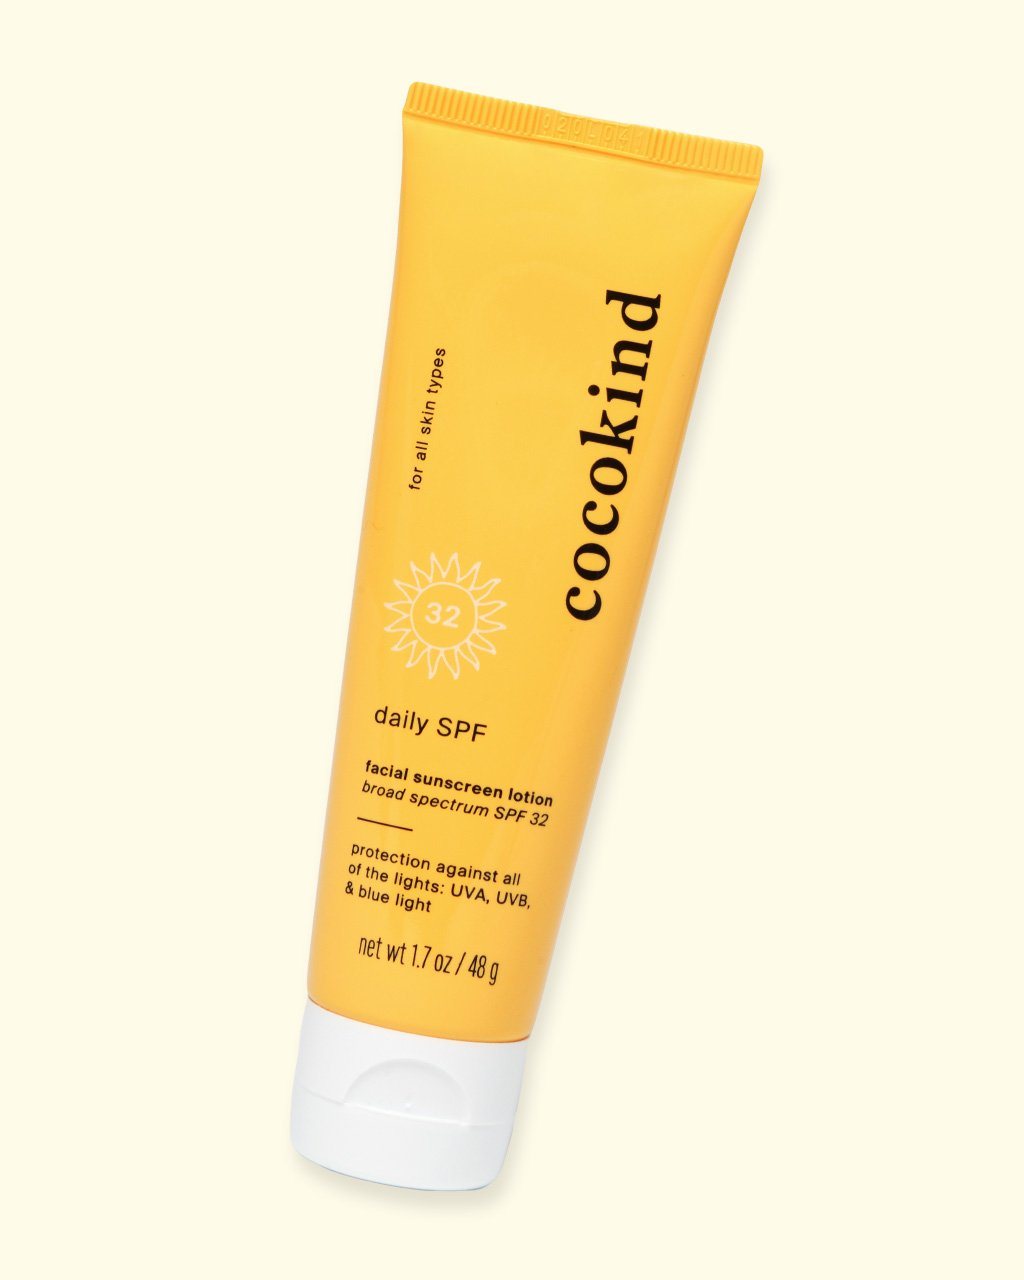 Daily SPF Sunscreen COCOKIND 